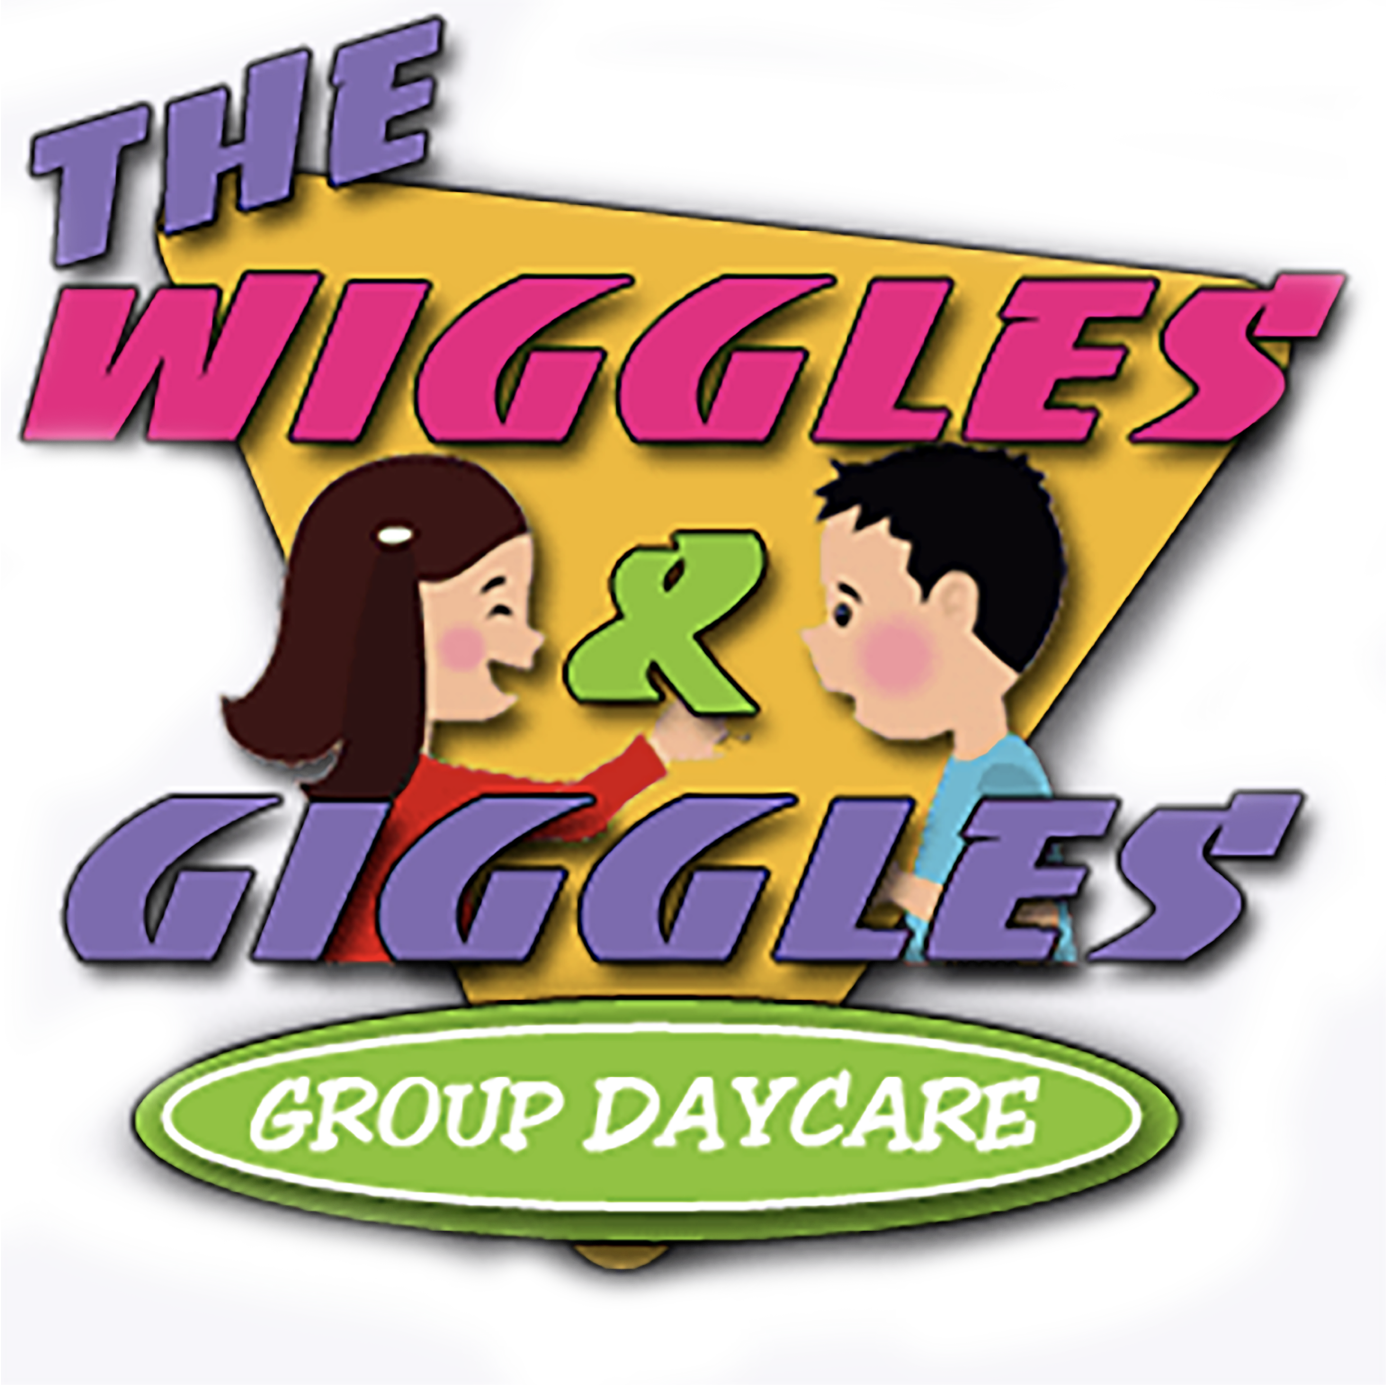 the wiggles and giggles daycare logo, with illustrations of a boy and girl looking at each other and a big yellow rectangle